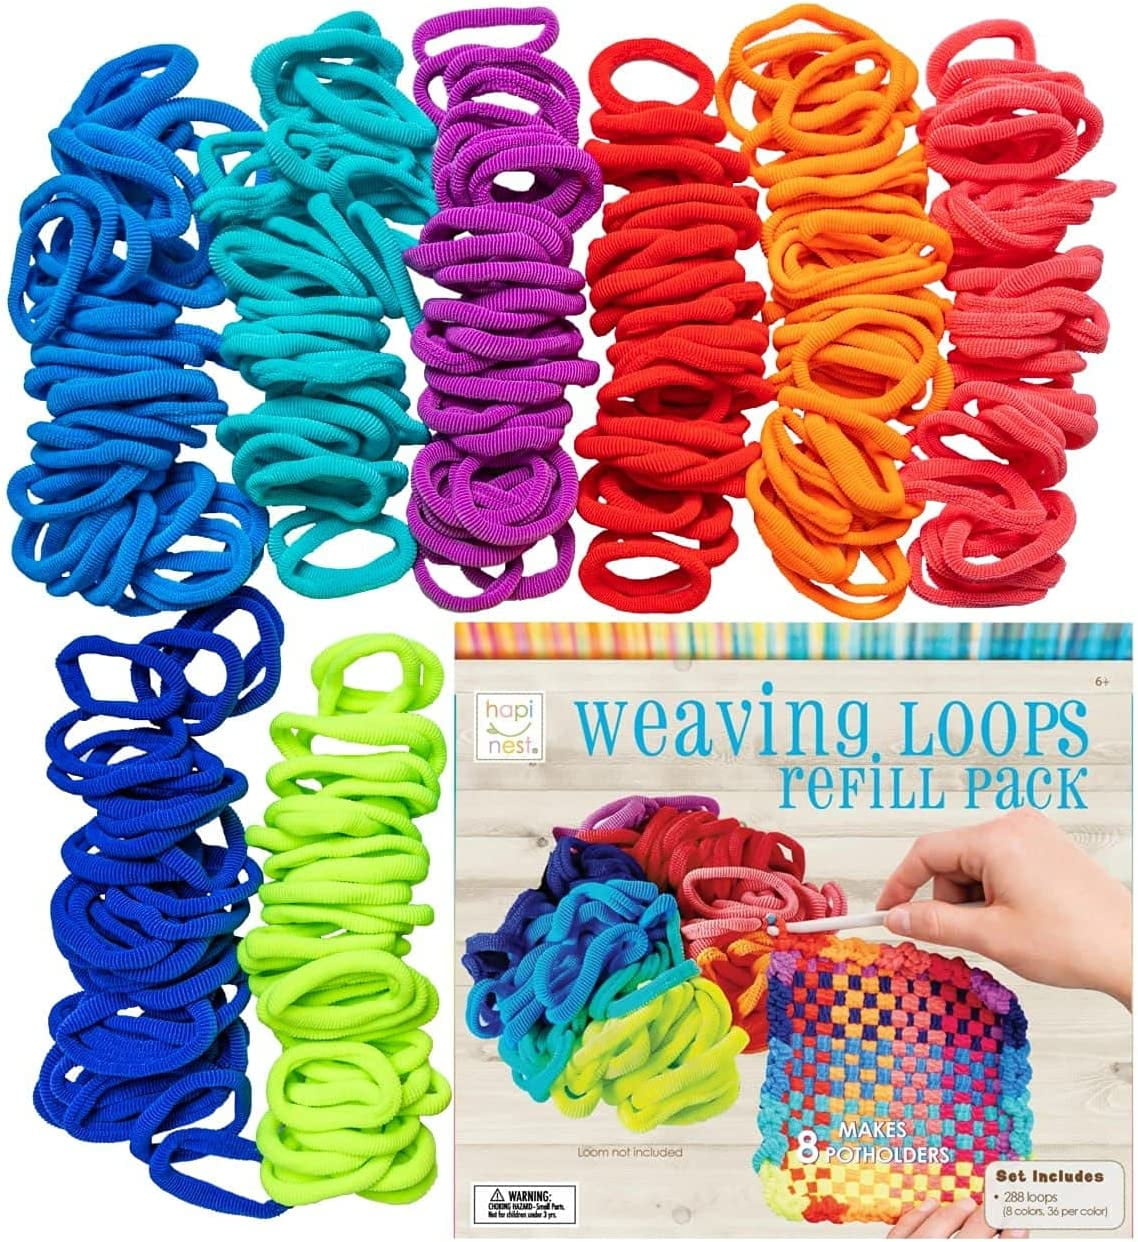 Hapinest Loom Bands Potholder Weaving Refill Pack for Kids , Set Makes 8  Pot Holders and Includes 288 Loops in 8 Colors Loom Refill 